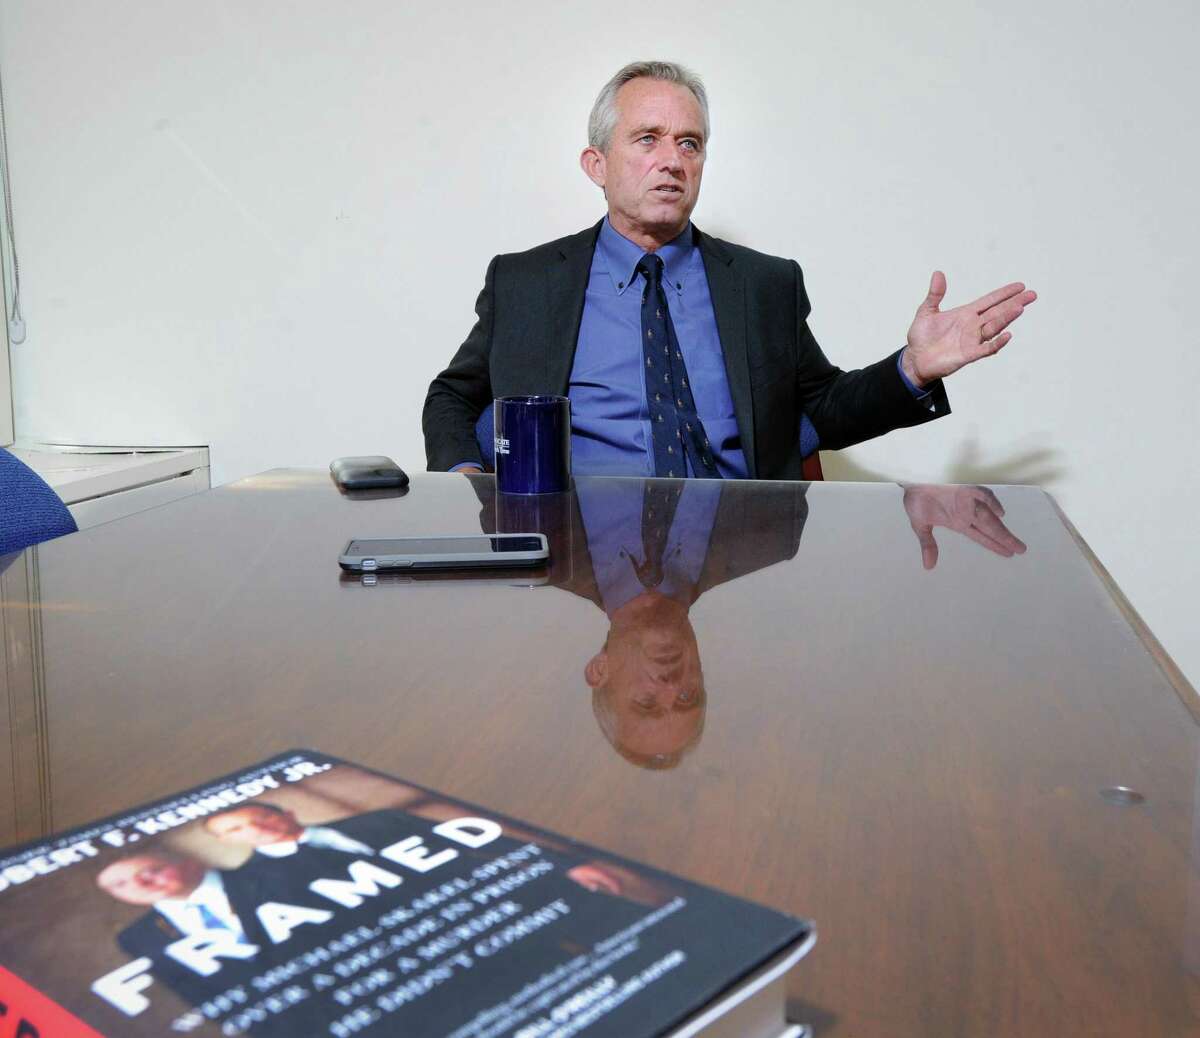 Robert Kennedy Jr., speaks about his book, "Framed: Why Michael Skakel Spent Over a Decade in Prison for a Murder He Didn’t Commit," during an interview at the Greenwich Time in Greenwich, Conn., Saturday, July 16, 2016. Kennedy, a former prosecutor, is a cousin of Michael Skakel, the subject of his book, who in 2002 was convicted of murder in the 1975 killing of Martha Moxley, 15, in Greenwich. Three years ago a Connecticut judge threw out Skakel's murder conviction on the grounds that Skakel did not receive a fair trial due to an inept defense. Skakel is free on bond awaiting the outcome of a Connecticut Supreme Court decision regarding his thrown-out murder conviction.